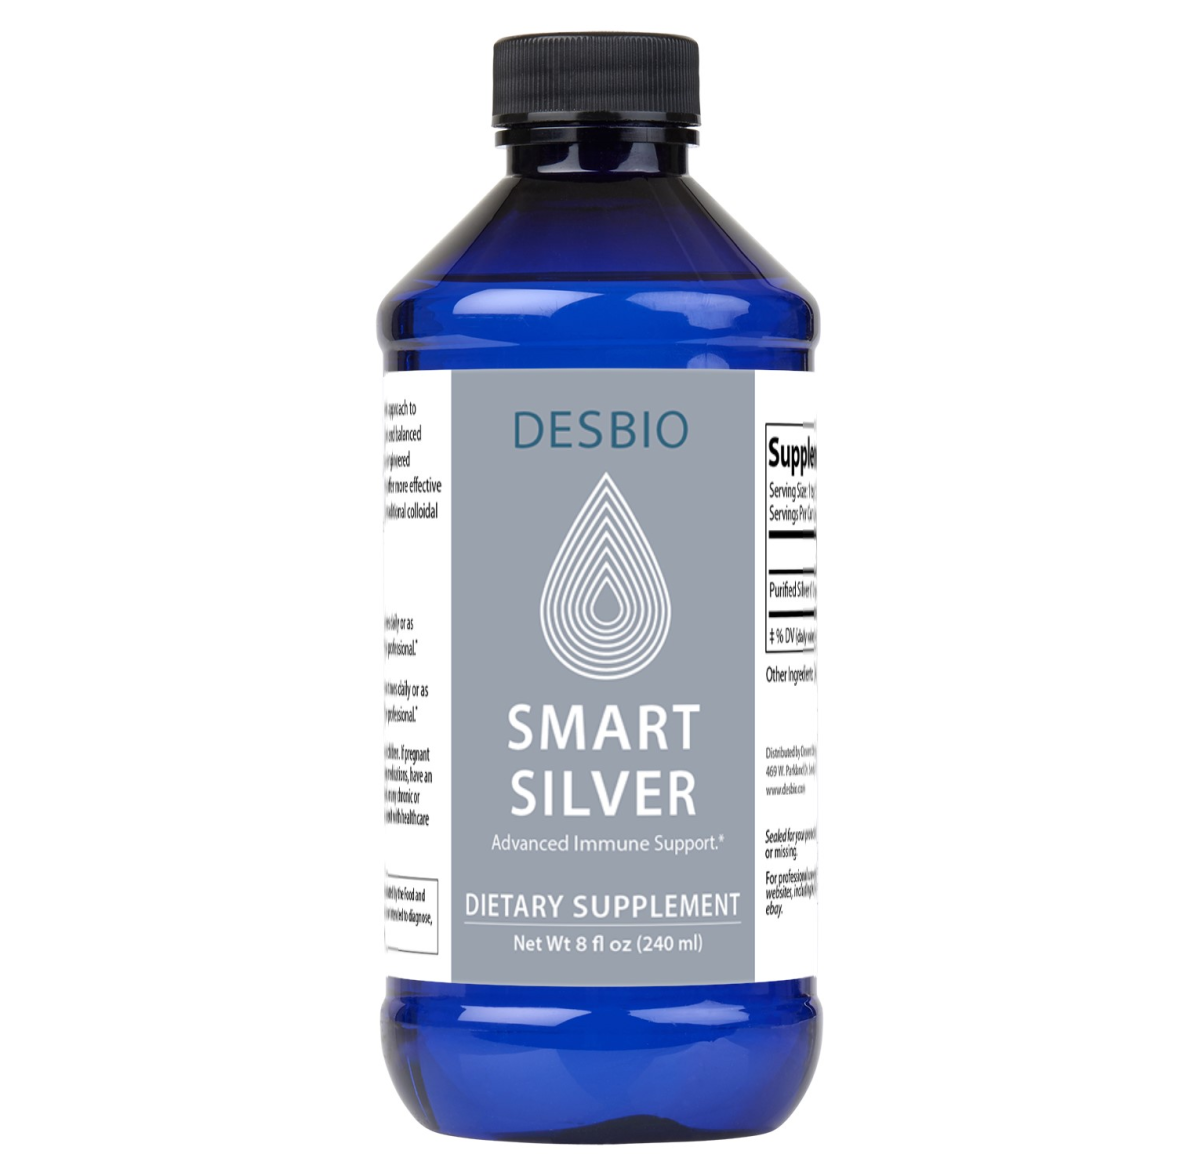 DesBio Smart Silver (This is NOT Collodial, It's BETTER!)